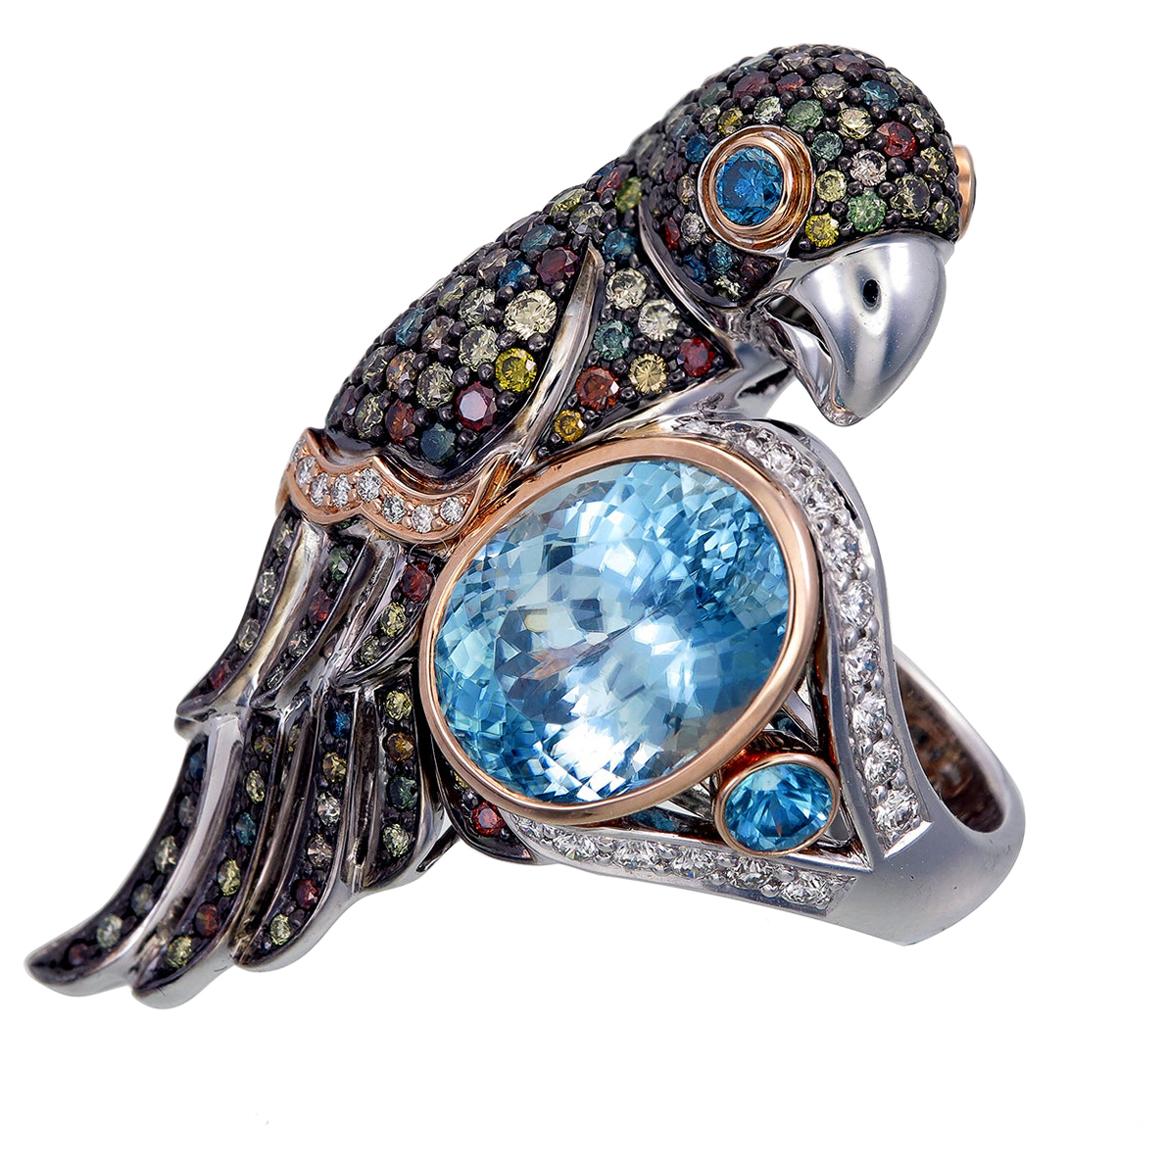 Zorab Creation 13.13 Carat Natural Blue Zircon Bird of Paradise Ring For Sale